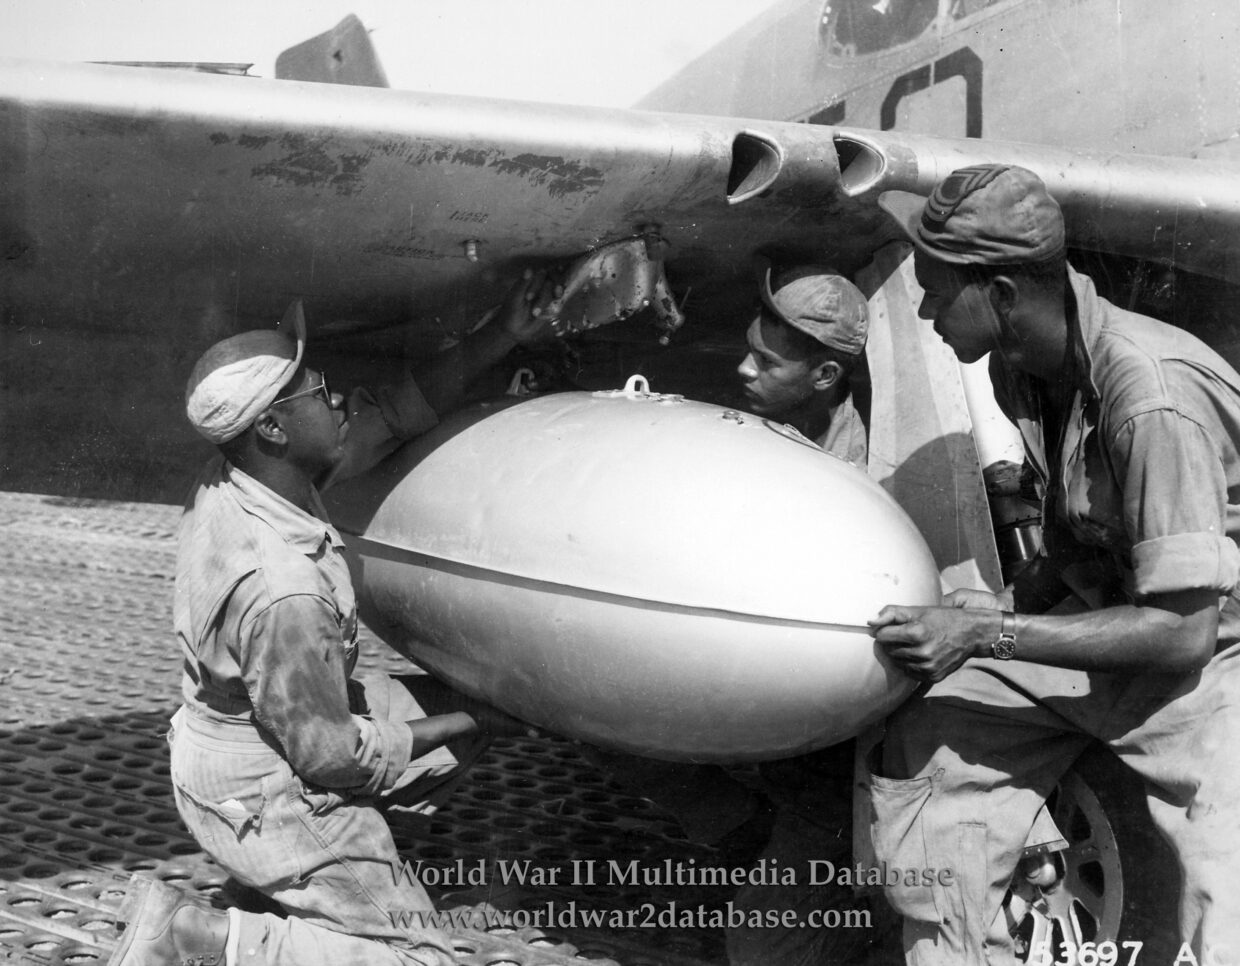 Ground Crew of 301st Fighter Squadron Affix Fuel Tank to P-51C Mustang